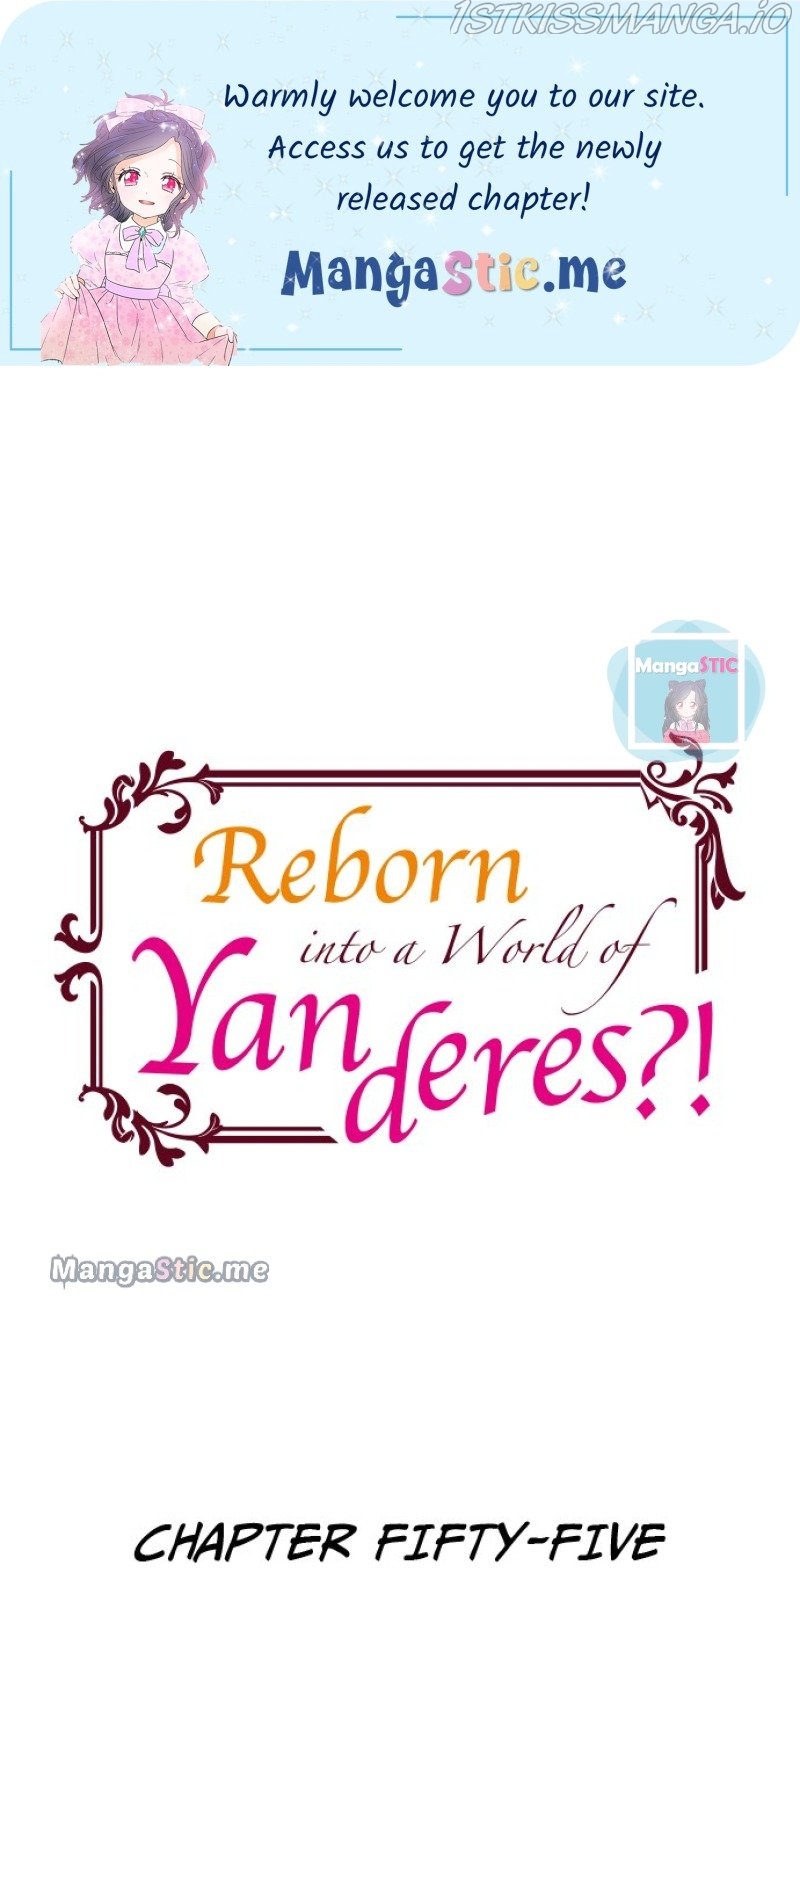 Reborn into a World of Yanderes?! chapter 55